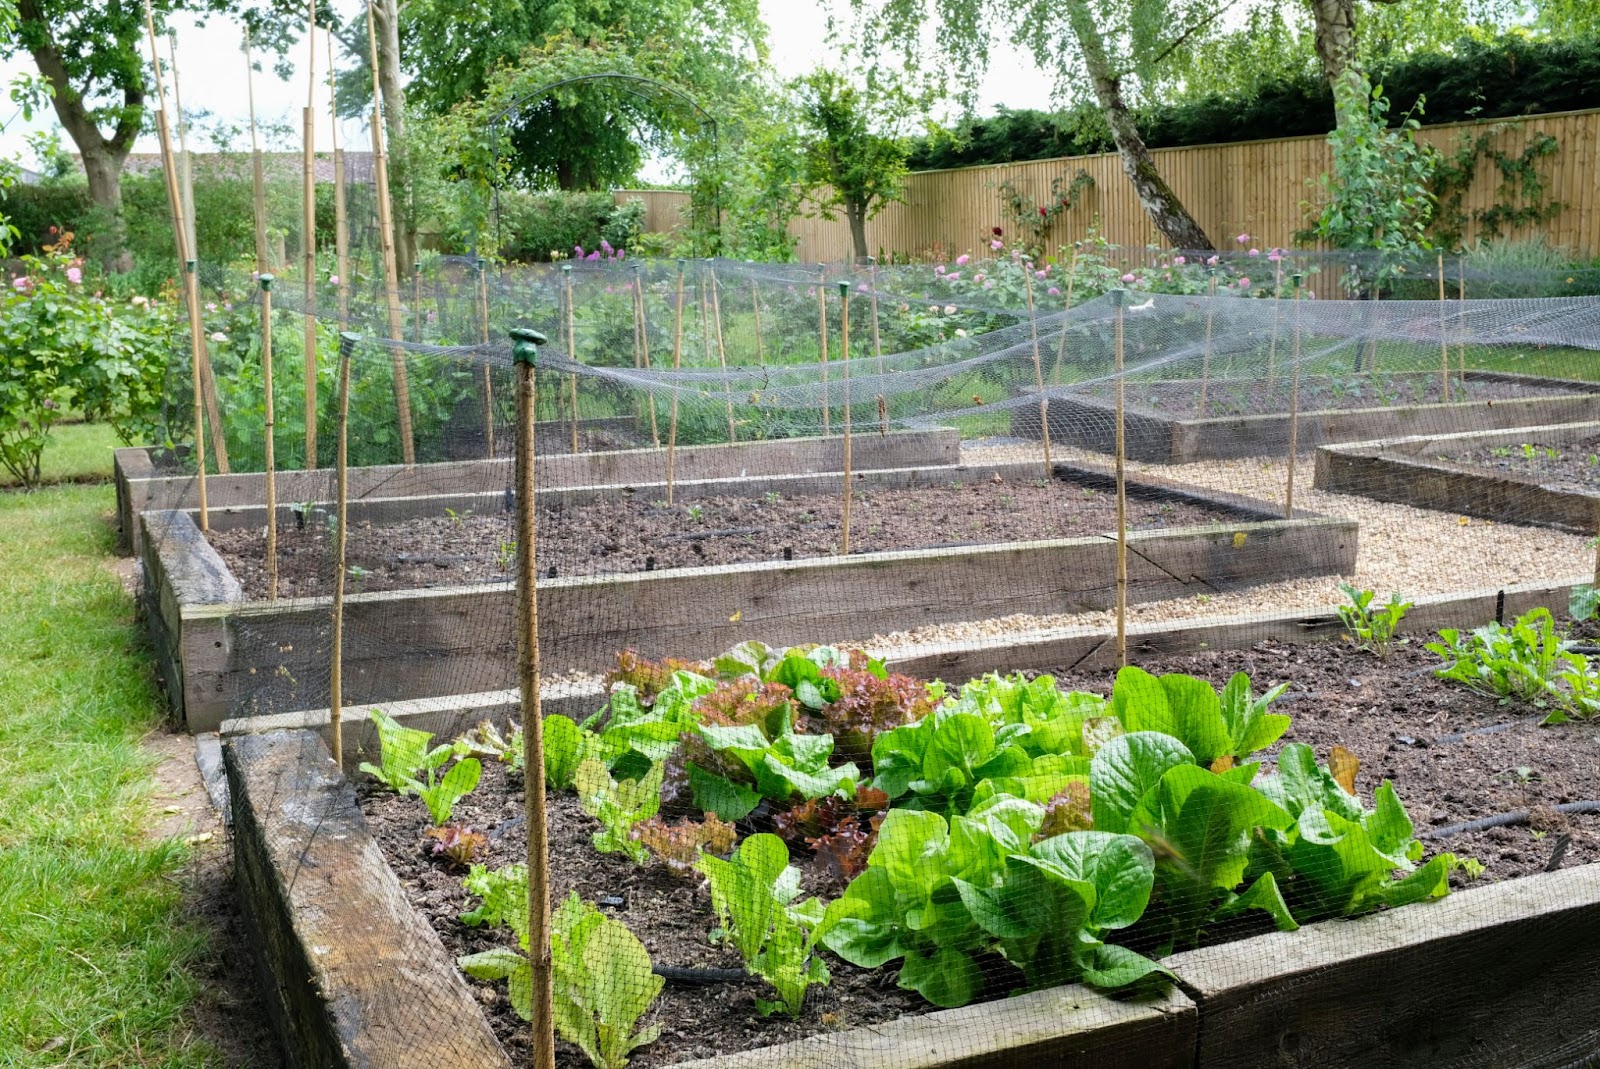 Netting over a number of vegetable patches in a garden